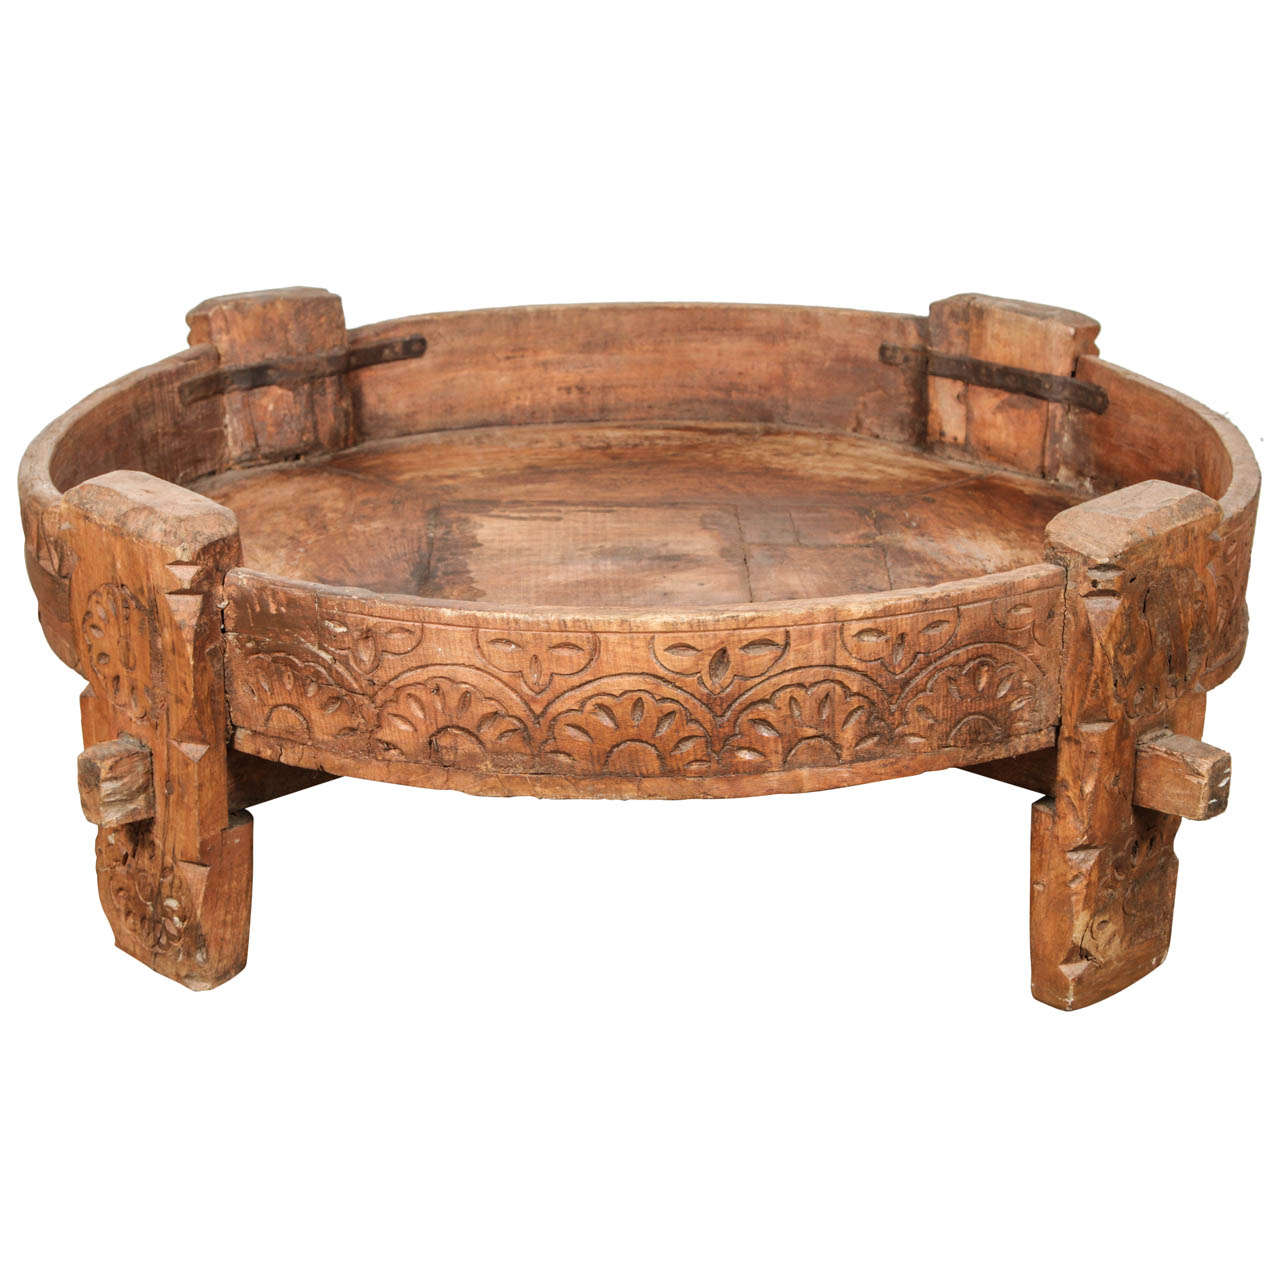 Moroccan Wooden Tribal Table